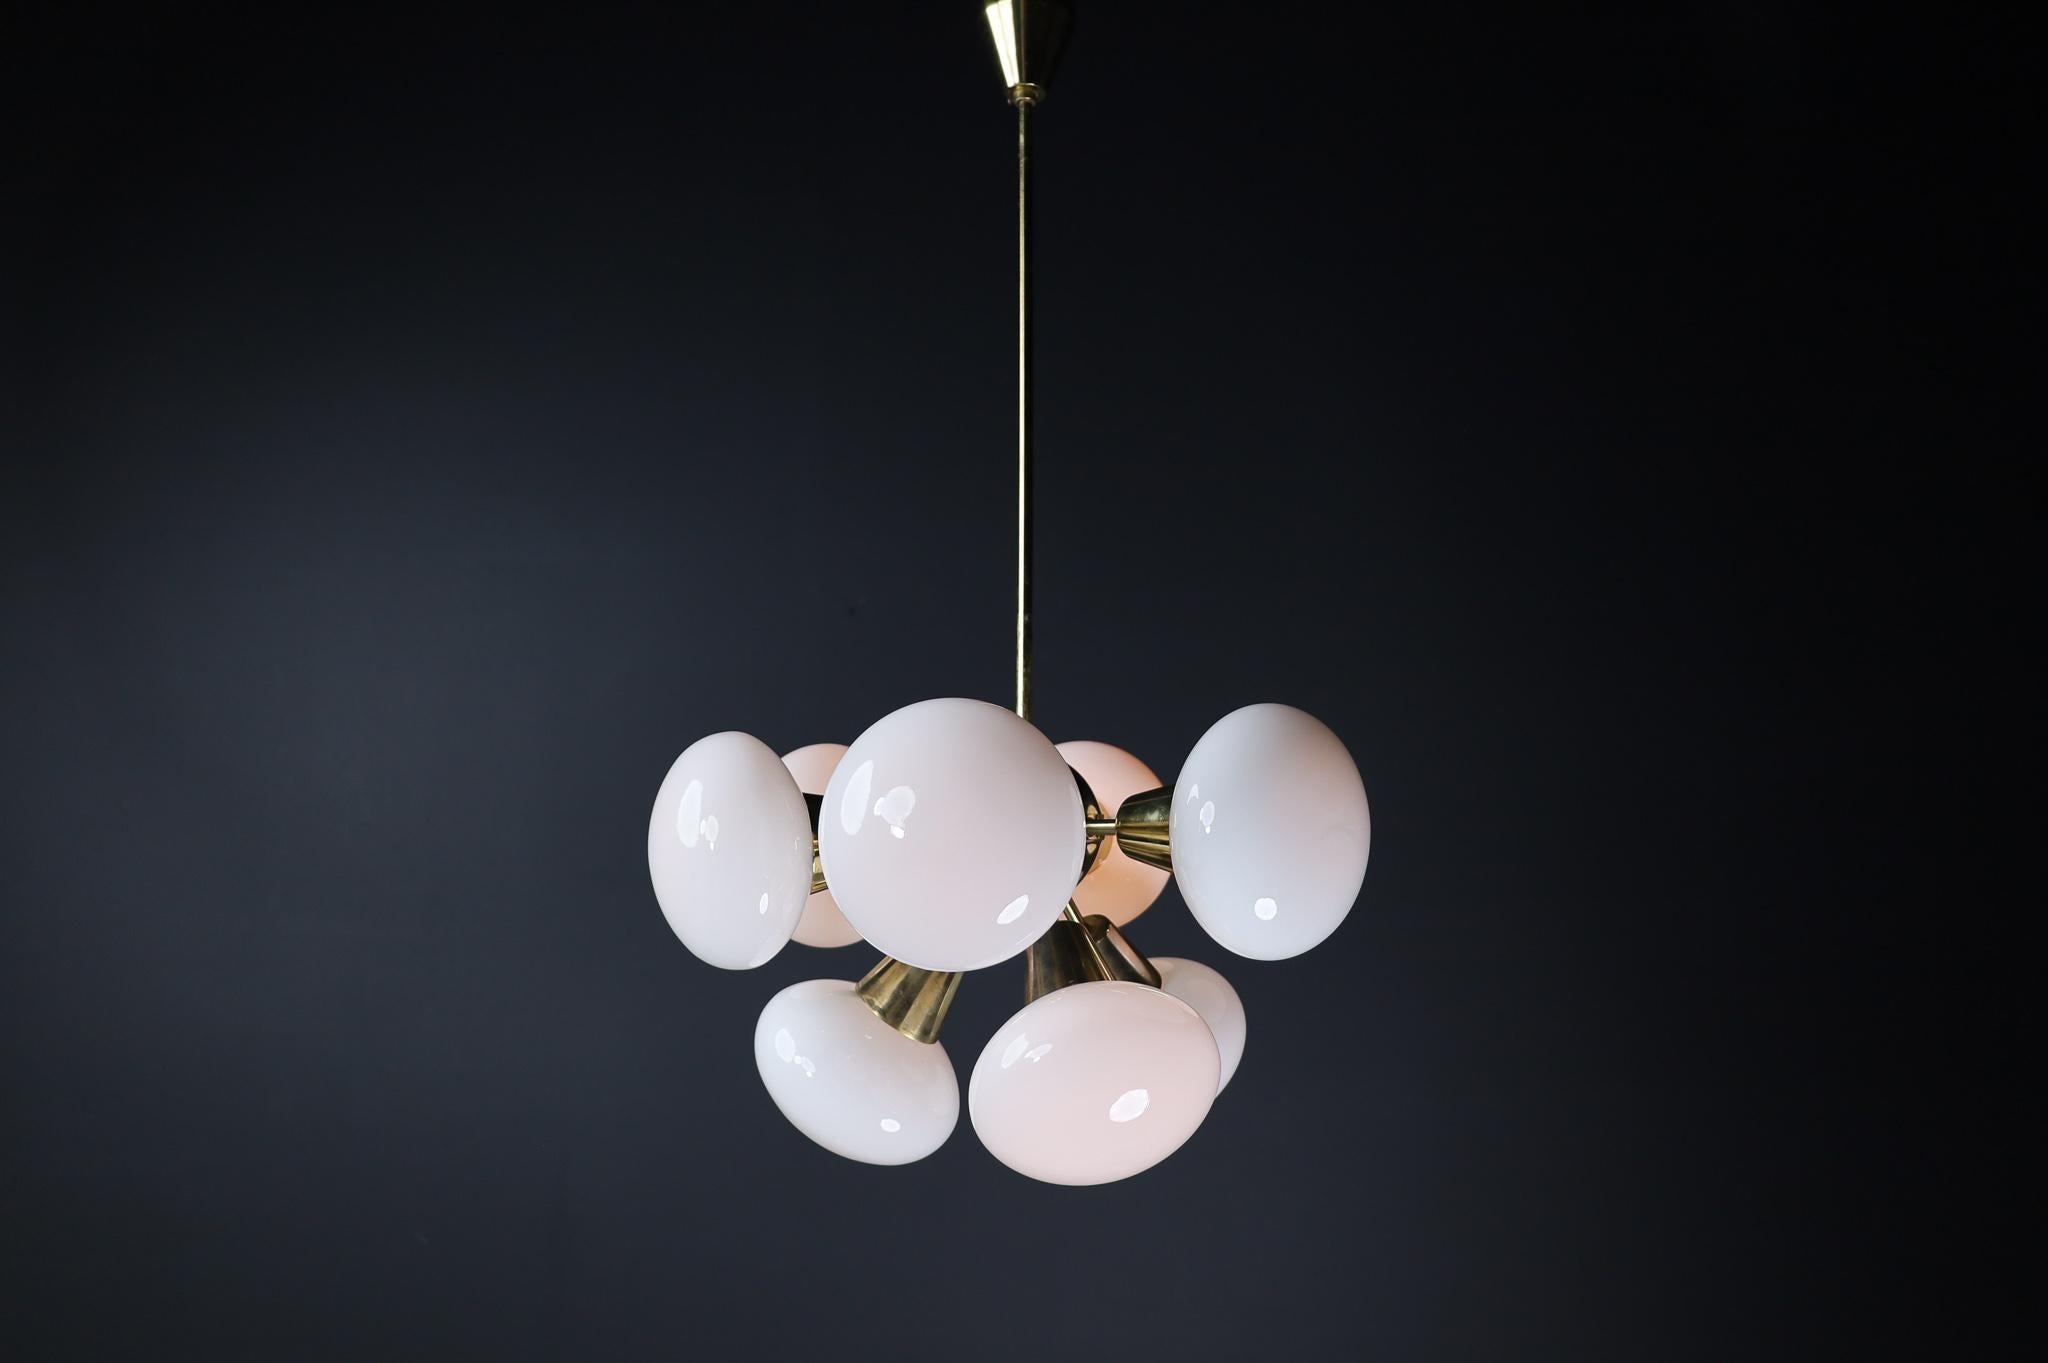 Large set Sputnik Chandeliers in Brass and Opaline Glass Spheres, Europe 1970s For Sale 1